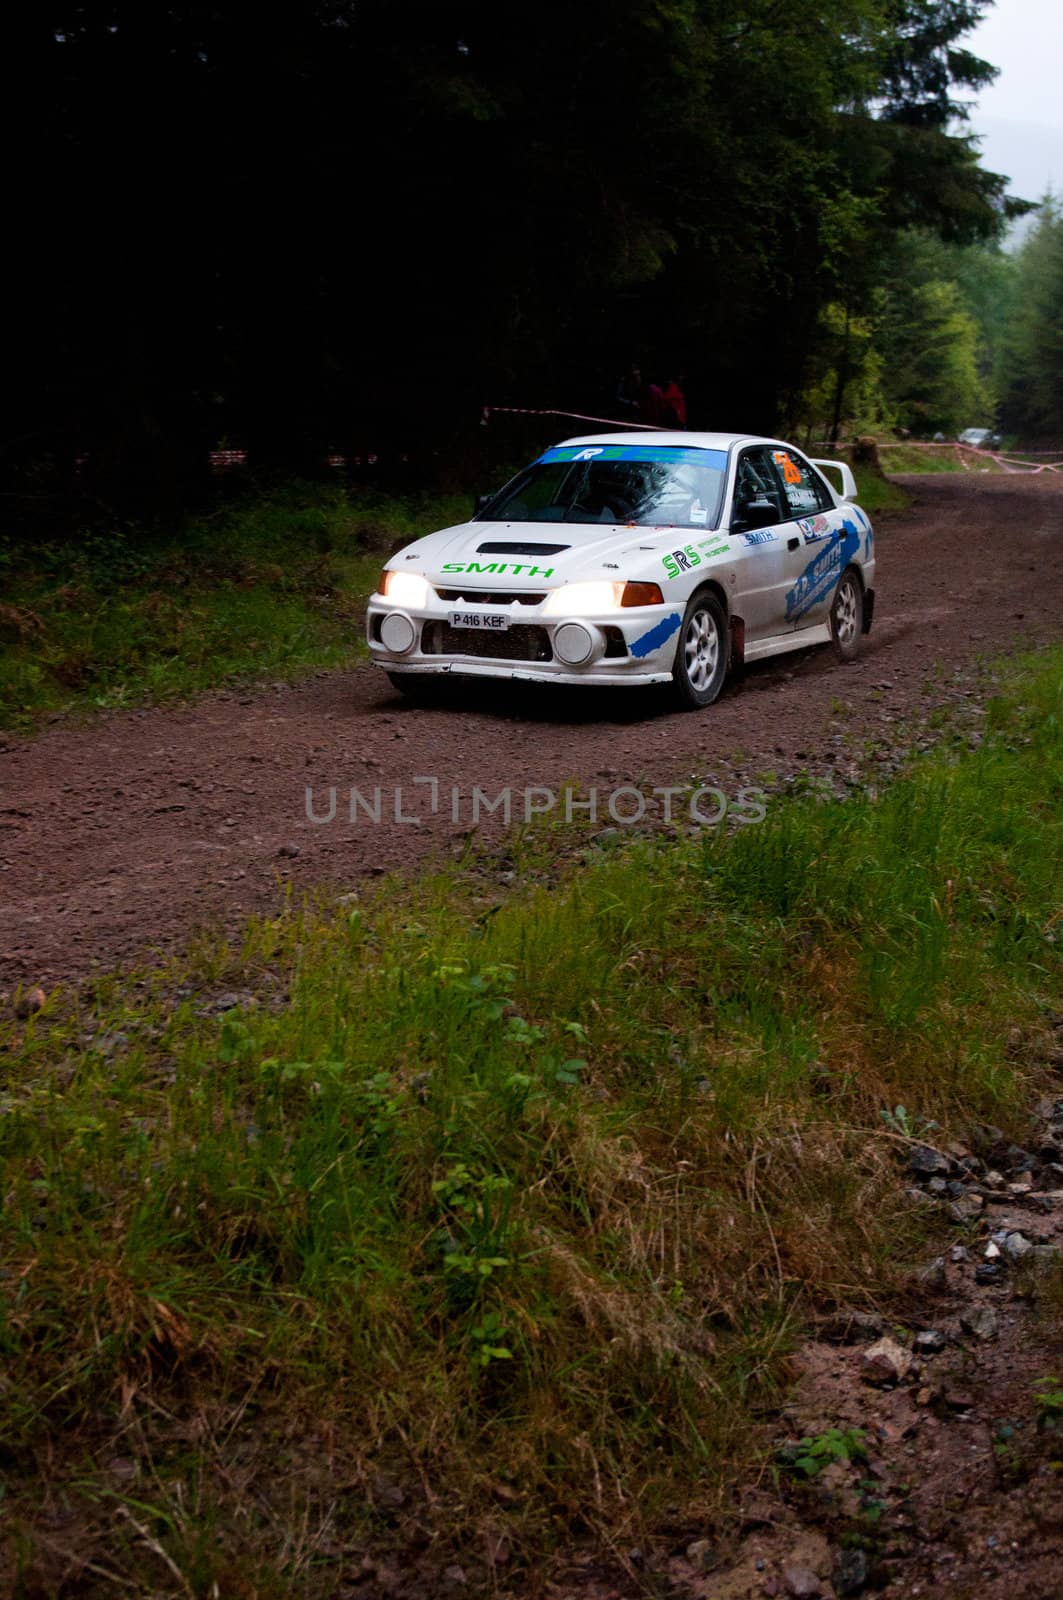 D. Smith driving Mitsubishi Evo by luissantos84